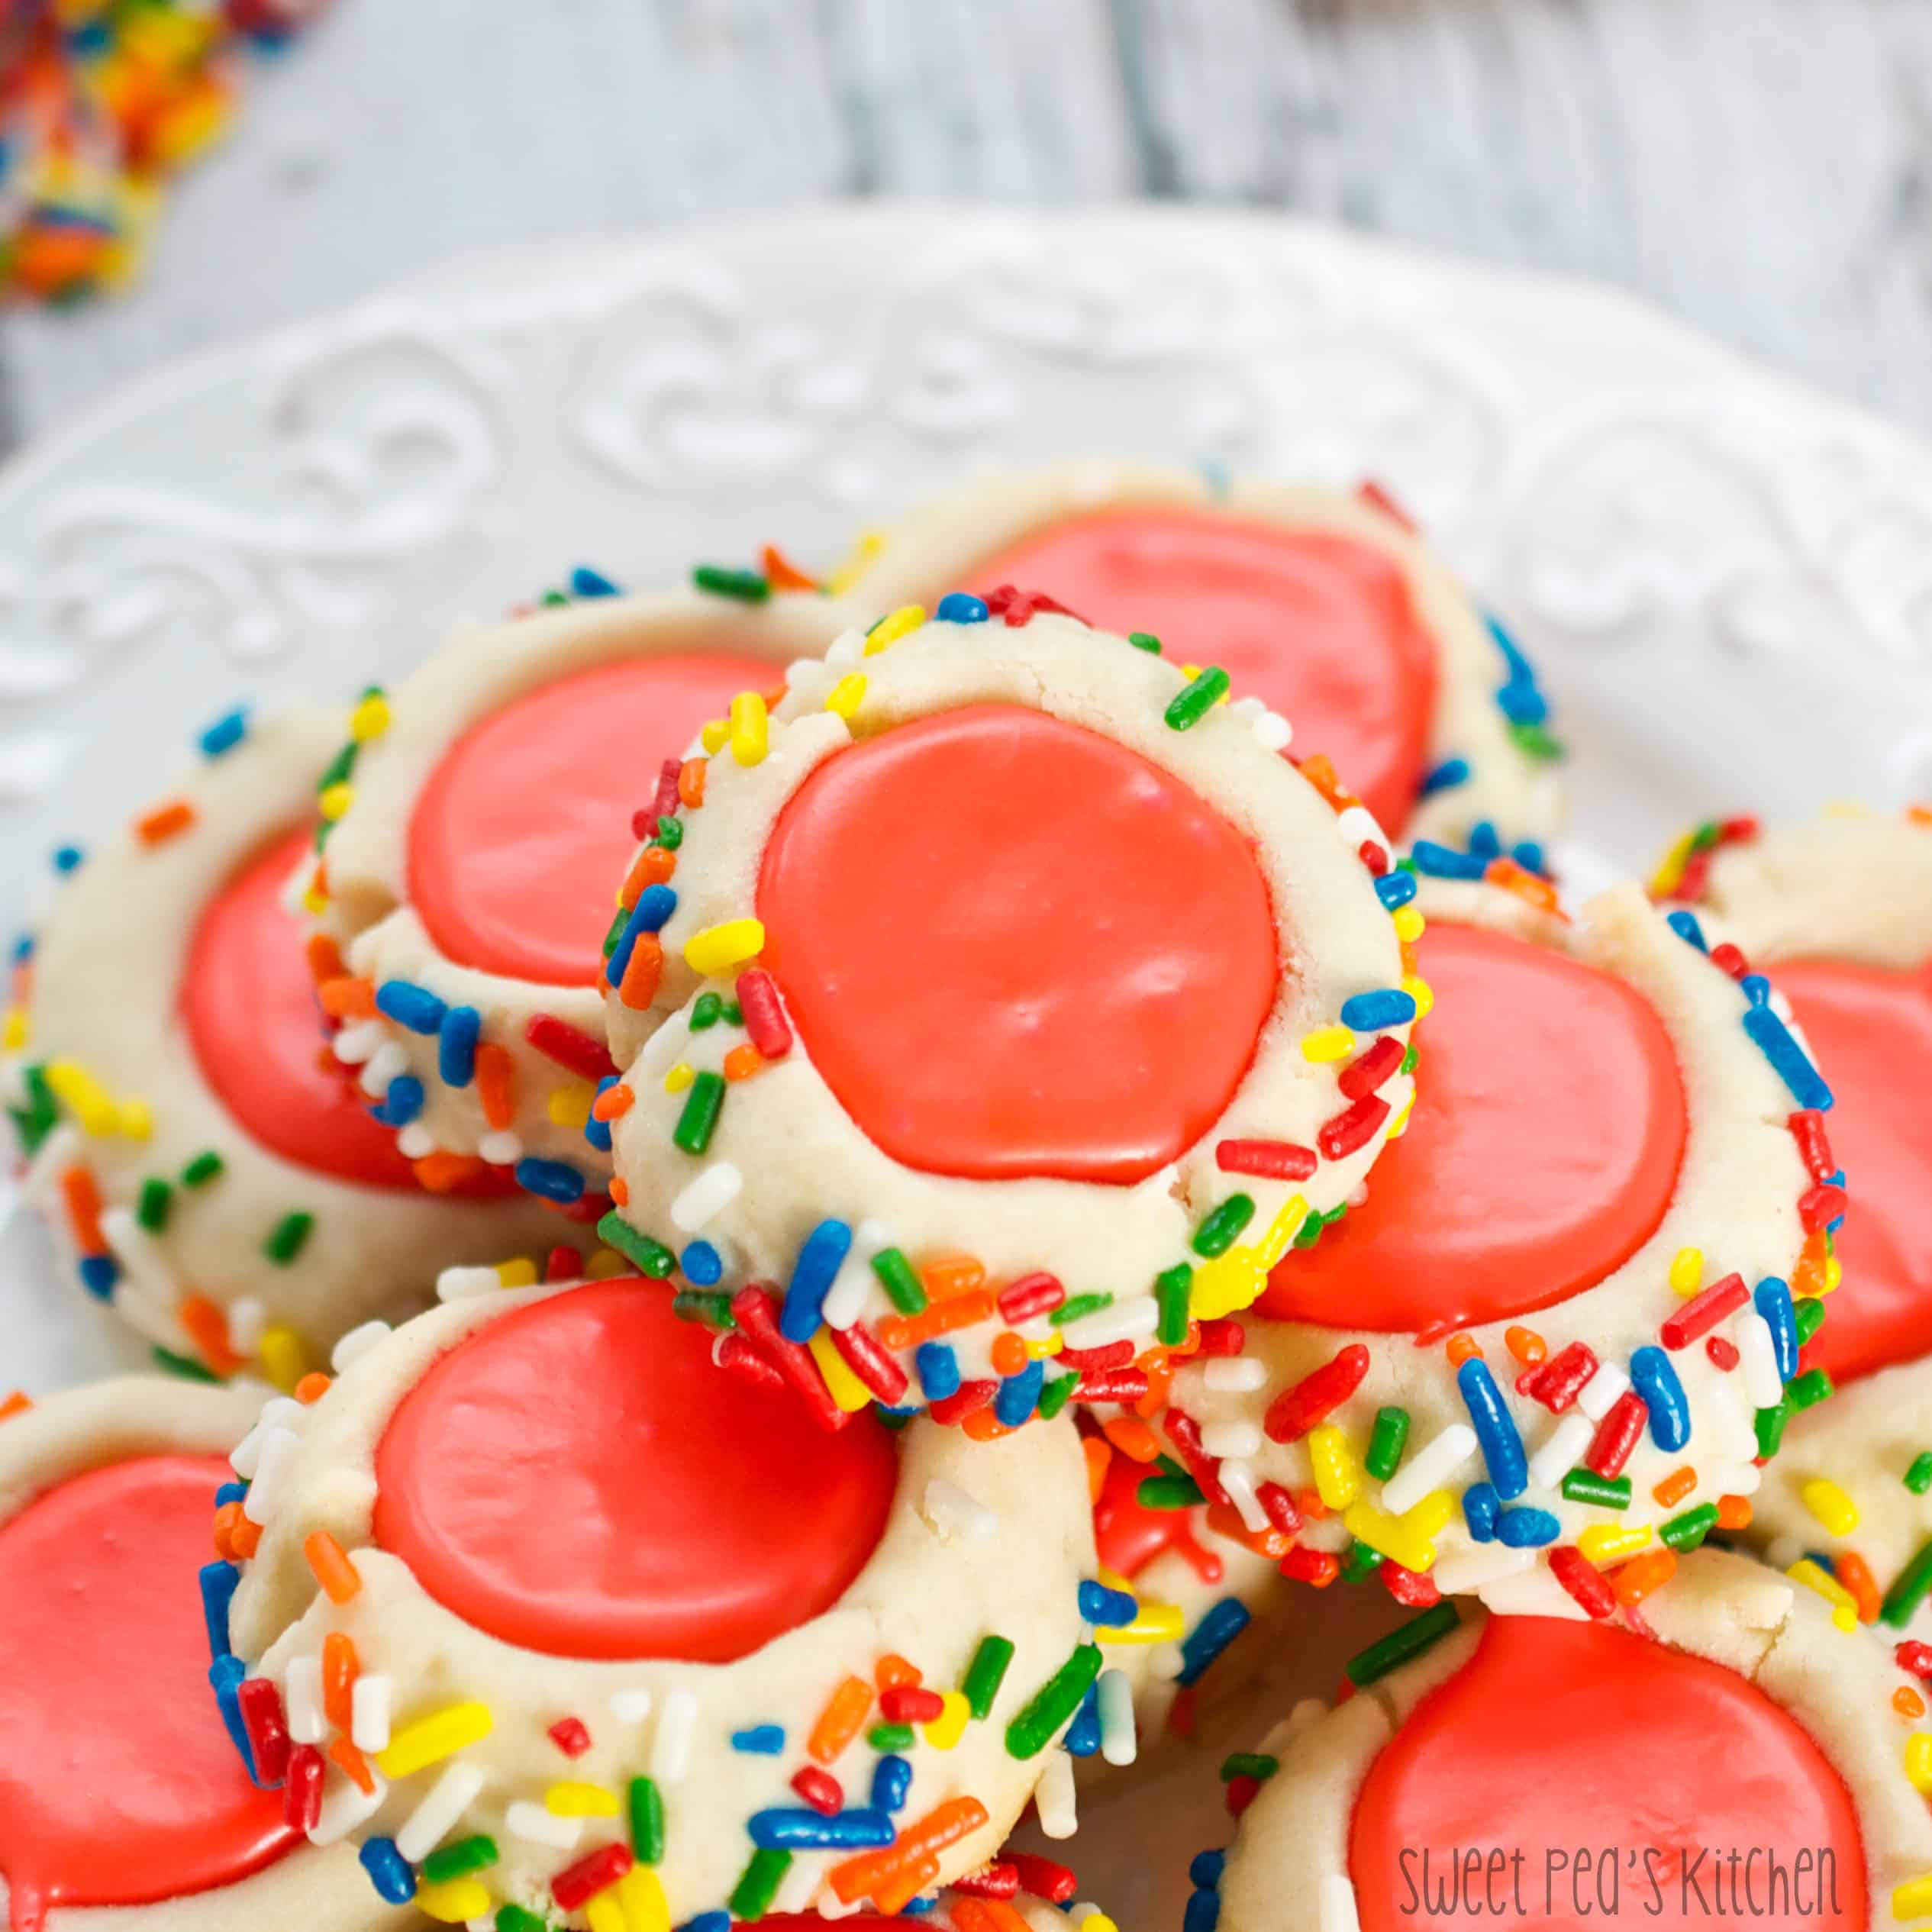 Plate with multiple cooked iced thumbprint cookies with sprinkles